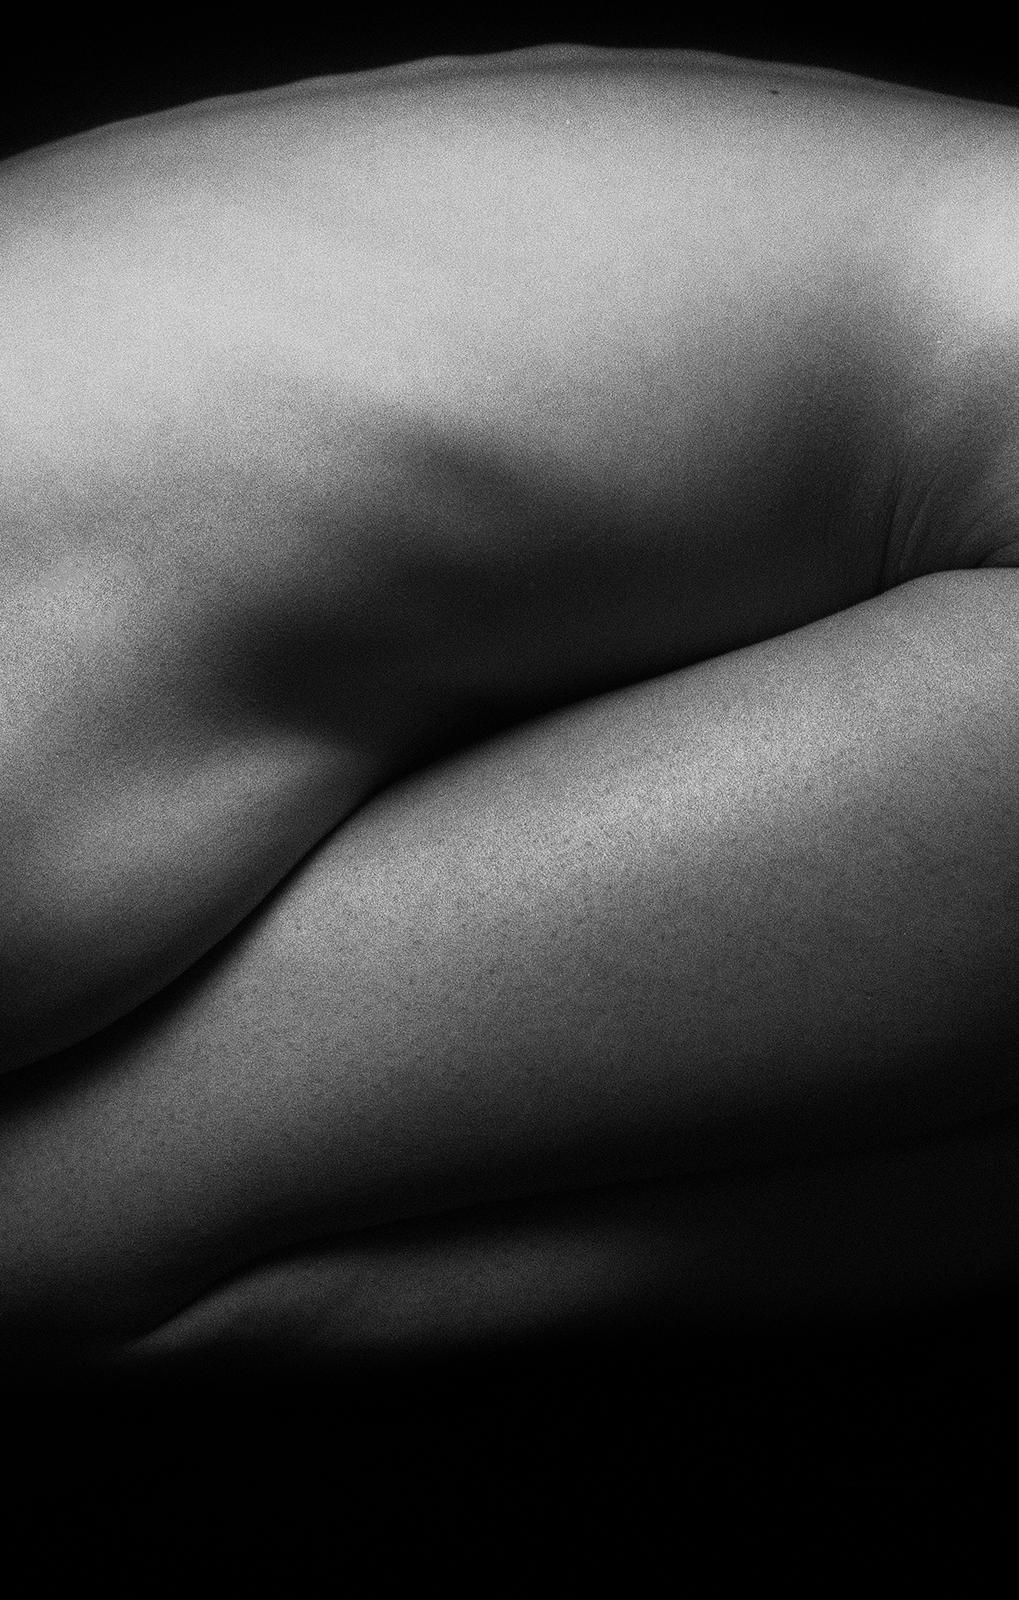 erotic black and white photography